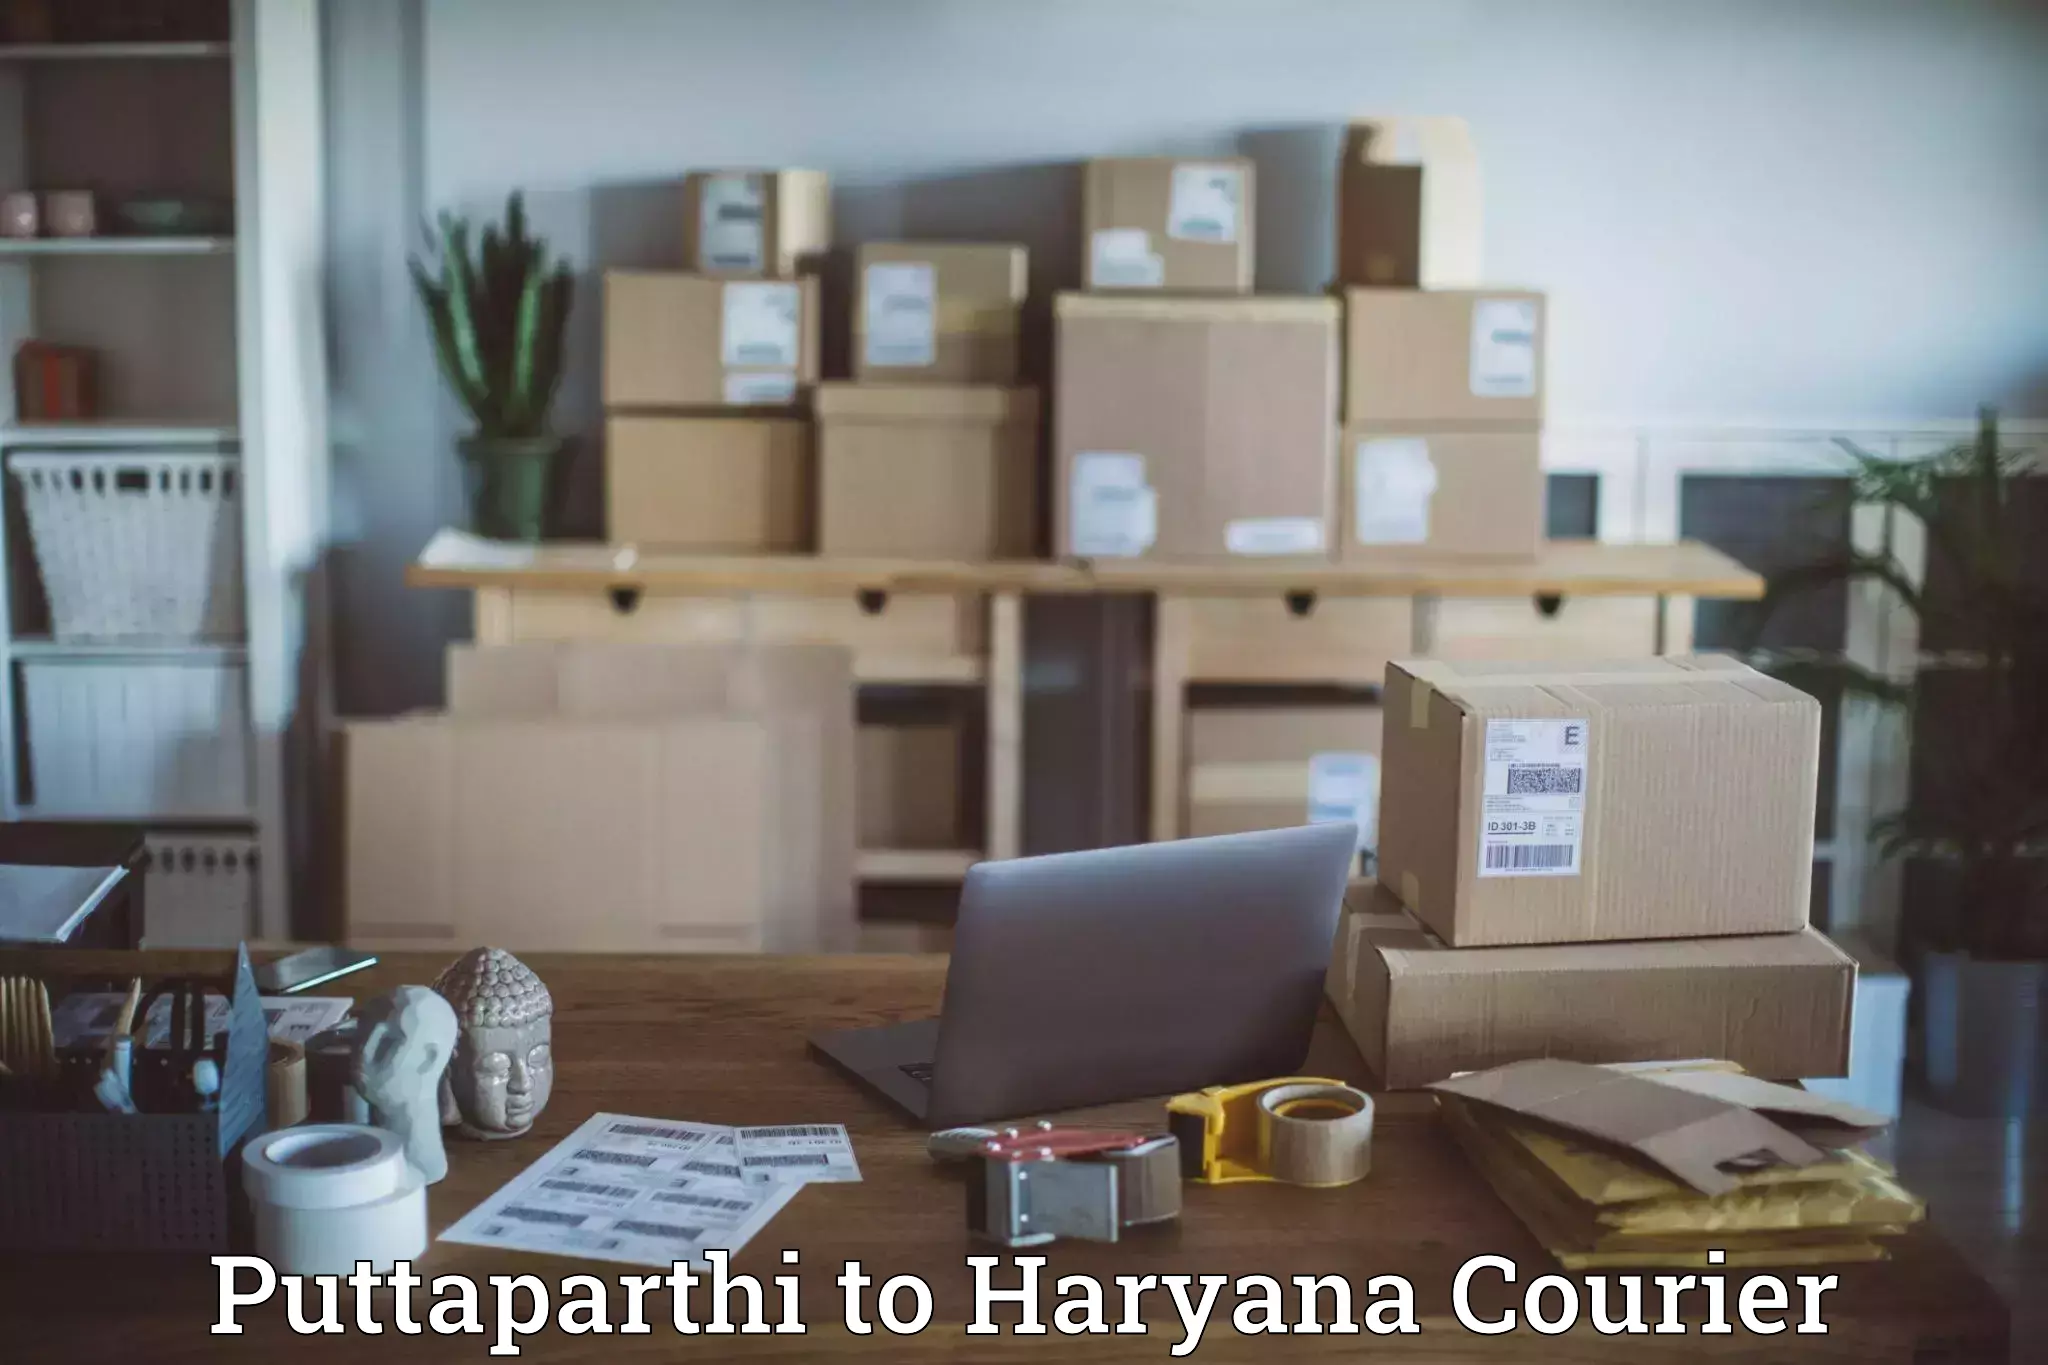 Delivery service partnership Puttaparthi to Assandh